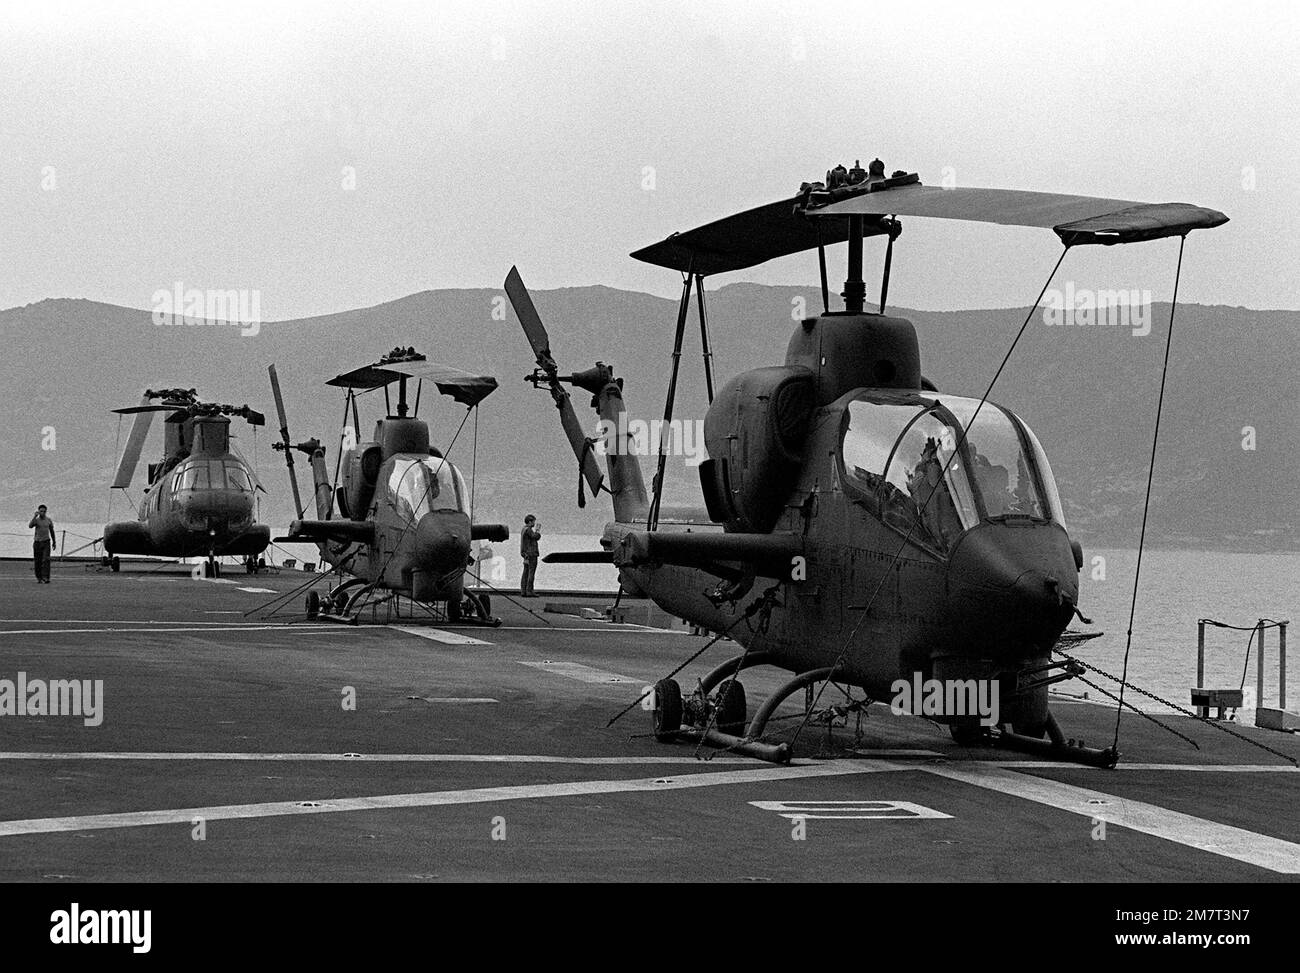 Two AH-1 Sea Cobra and a CH-46 Sea Knight helicopter are secured on the deck of the amphibious ship USS SAIPAN (LHA-2) during NATO exercise Display Determination '81. Subject Operation/Series: DISPLAY DETERMINATION '81 Country: Mediterranean Sea (MED) Stock Photo